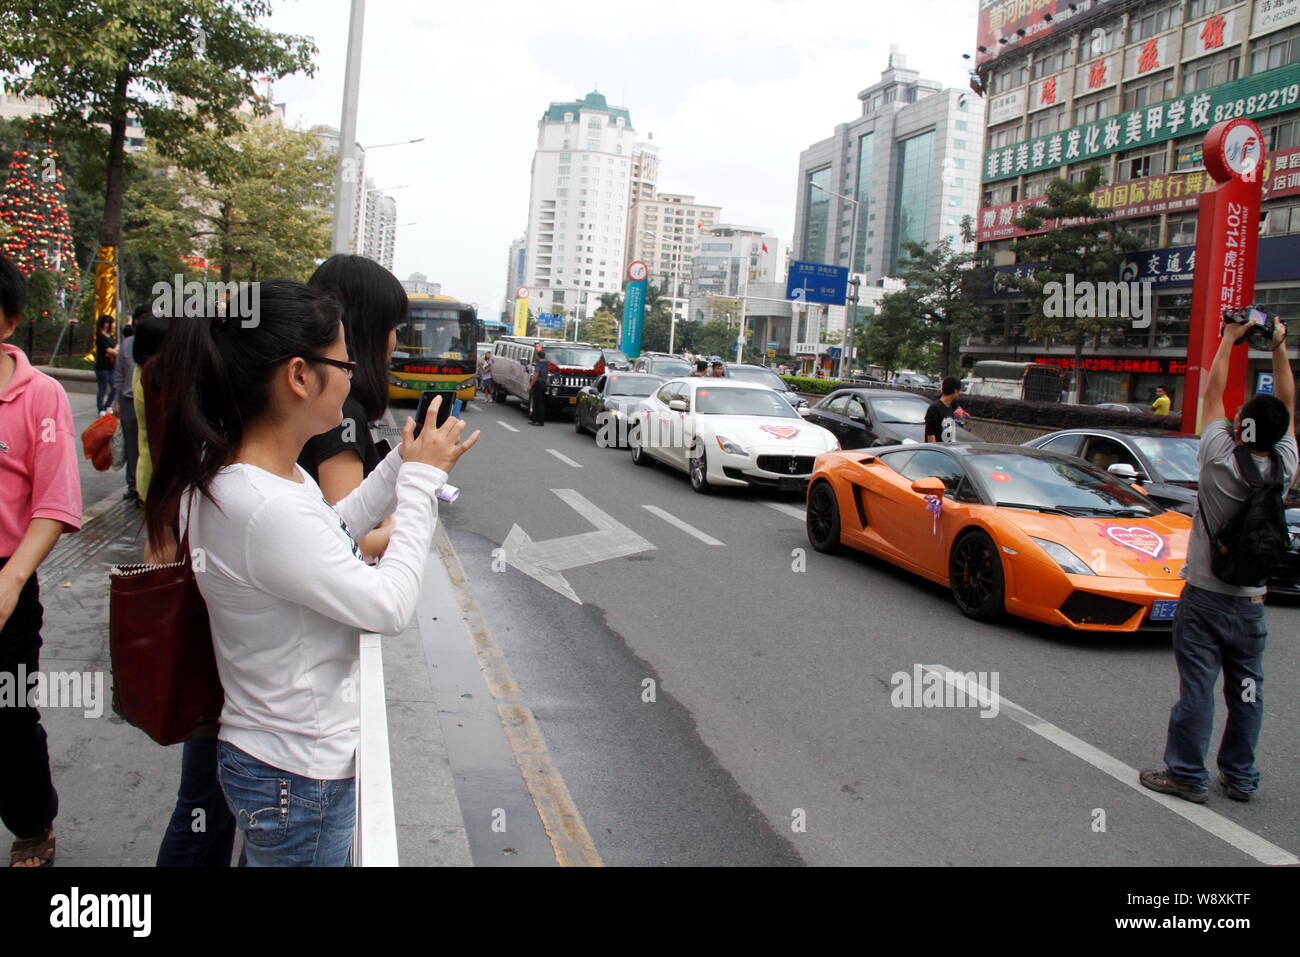 Pedestrians take photos or look at sports cars and other vehicles in the wedding parade on a street during Chinese entrepreneur Chen Junliang's weddin Stock Photo